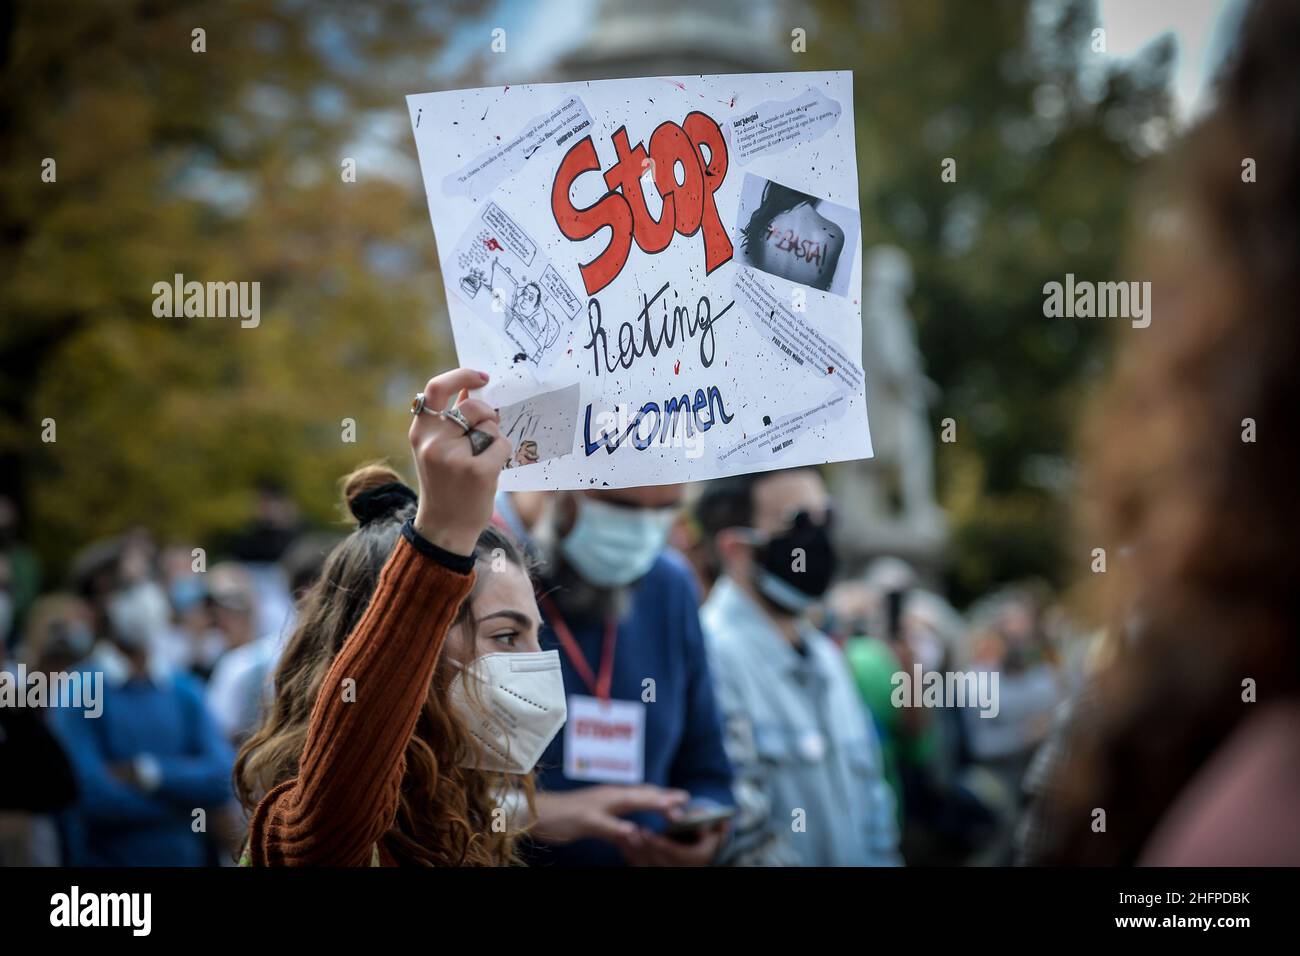 Claudio Furlan - LaPresse 10 October 2020 Milano (Italy) News Ora Basta! demonstration organized by lgbt rights movements for the approval of the Zan law on transphobia Stock Photo